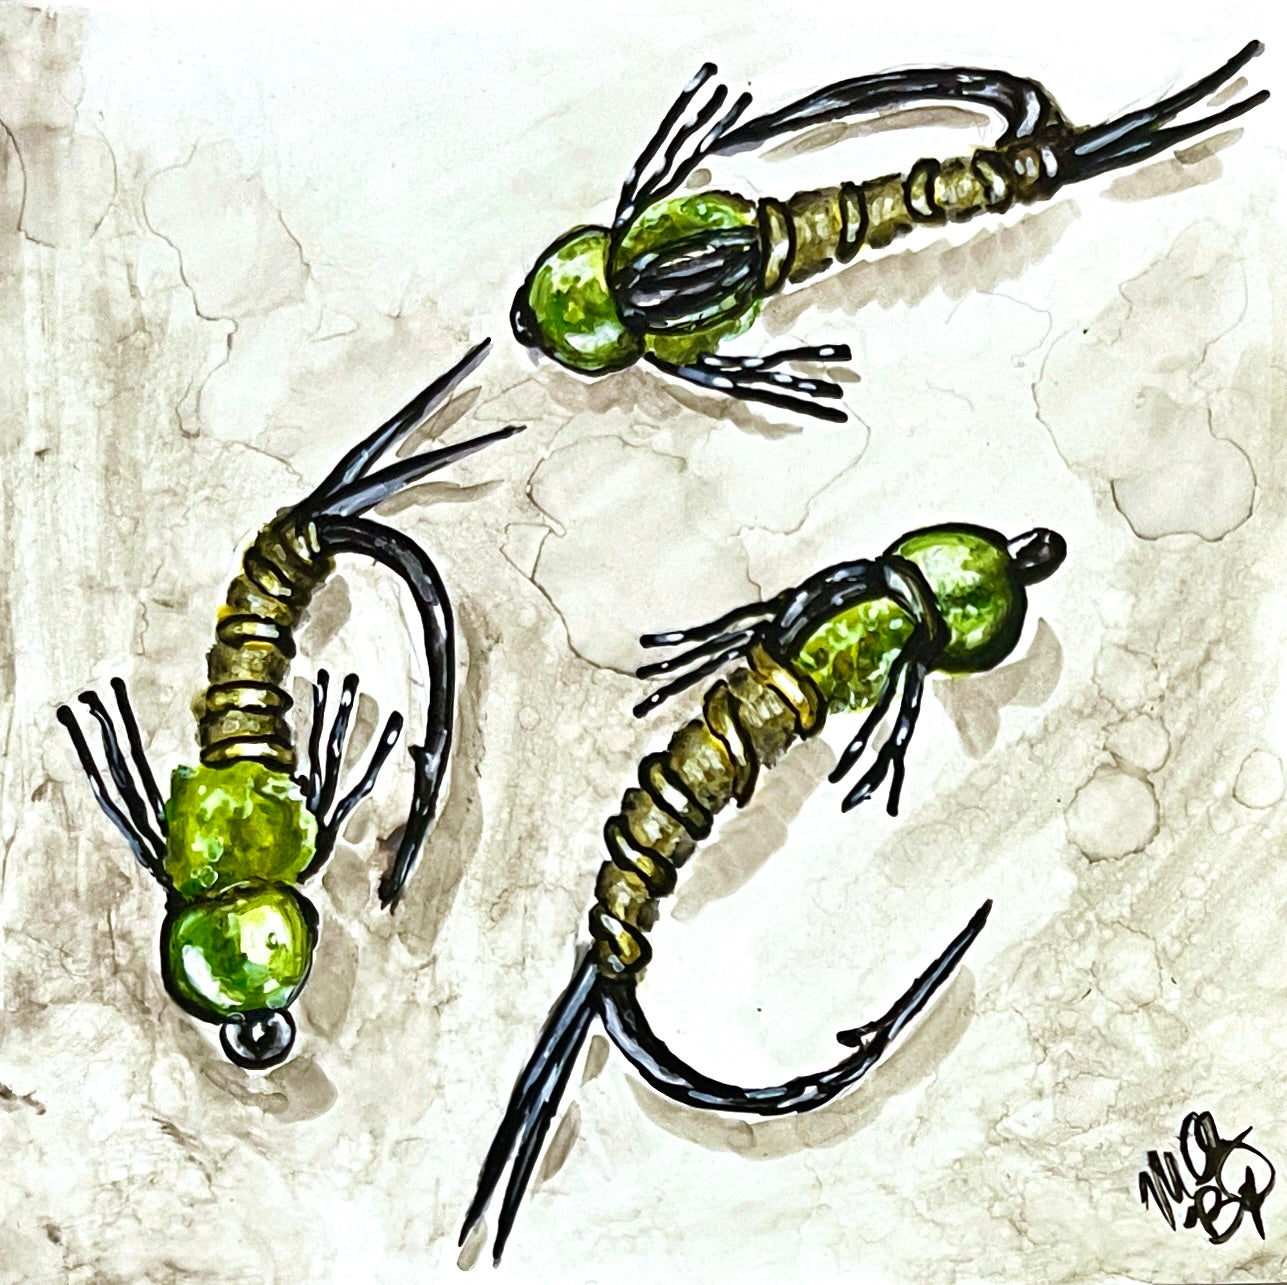 Scattering of Nymphs